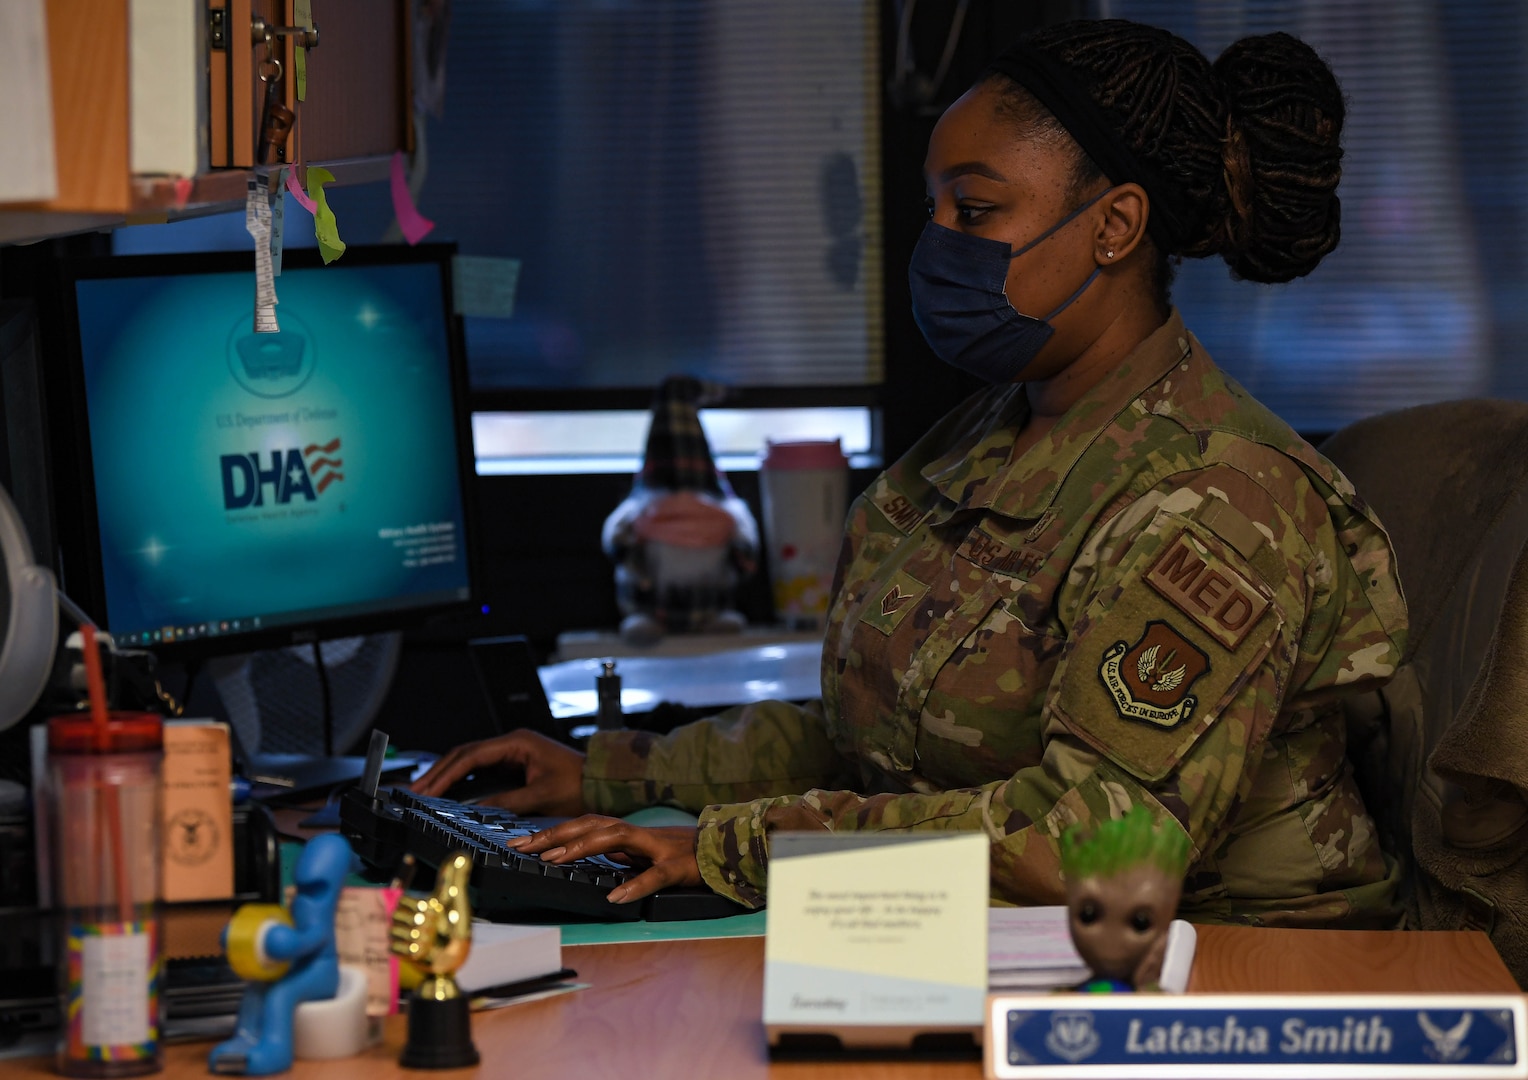 U.S. Air Force Tech. Sgt. Latasha Smith, 86th Operational Medical Readiness Squadron warrior medicine clinic flight chief, manages patient schedules at Ramstein Air Base, Germany, Feb. 1, 2022. Smith oversees operations for 26 staff members that render comprehensive care for approximately 8,000 active duty service members, supporting 175 units and three wings.
(U.S. Air Force photo by Airman 1st Class Jared Lovett)